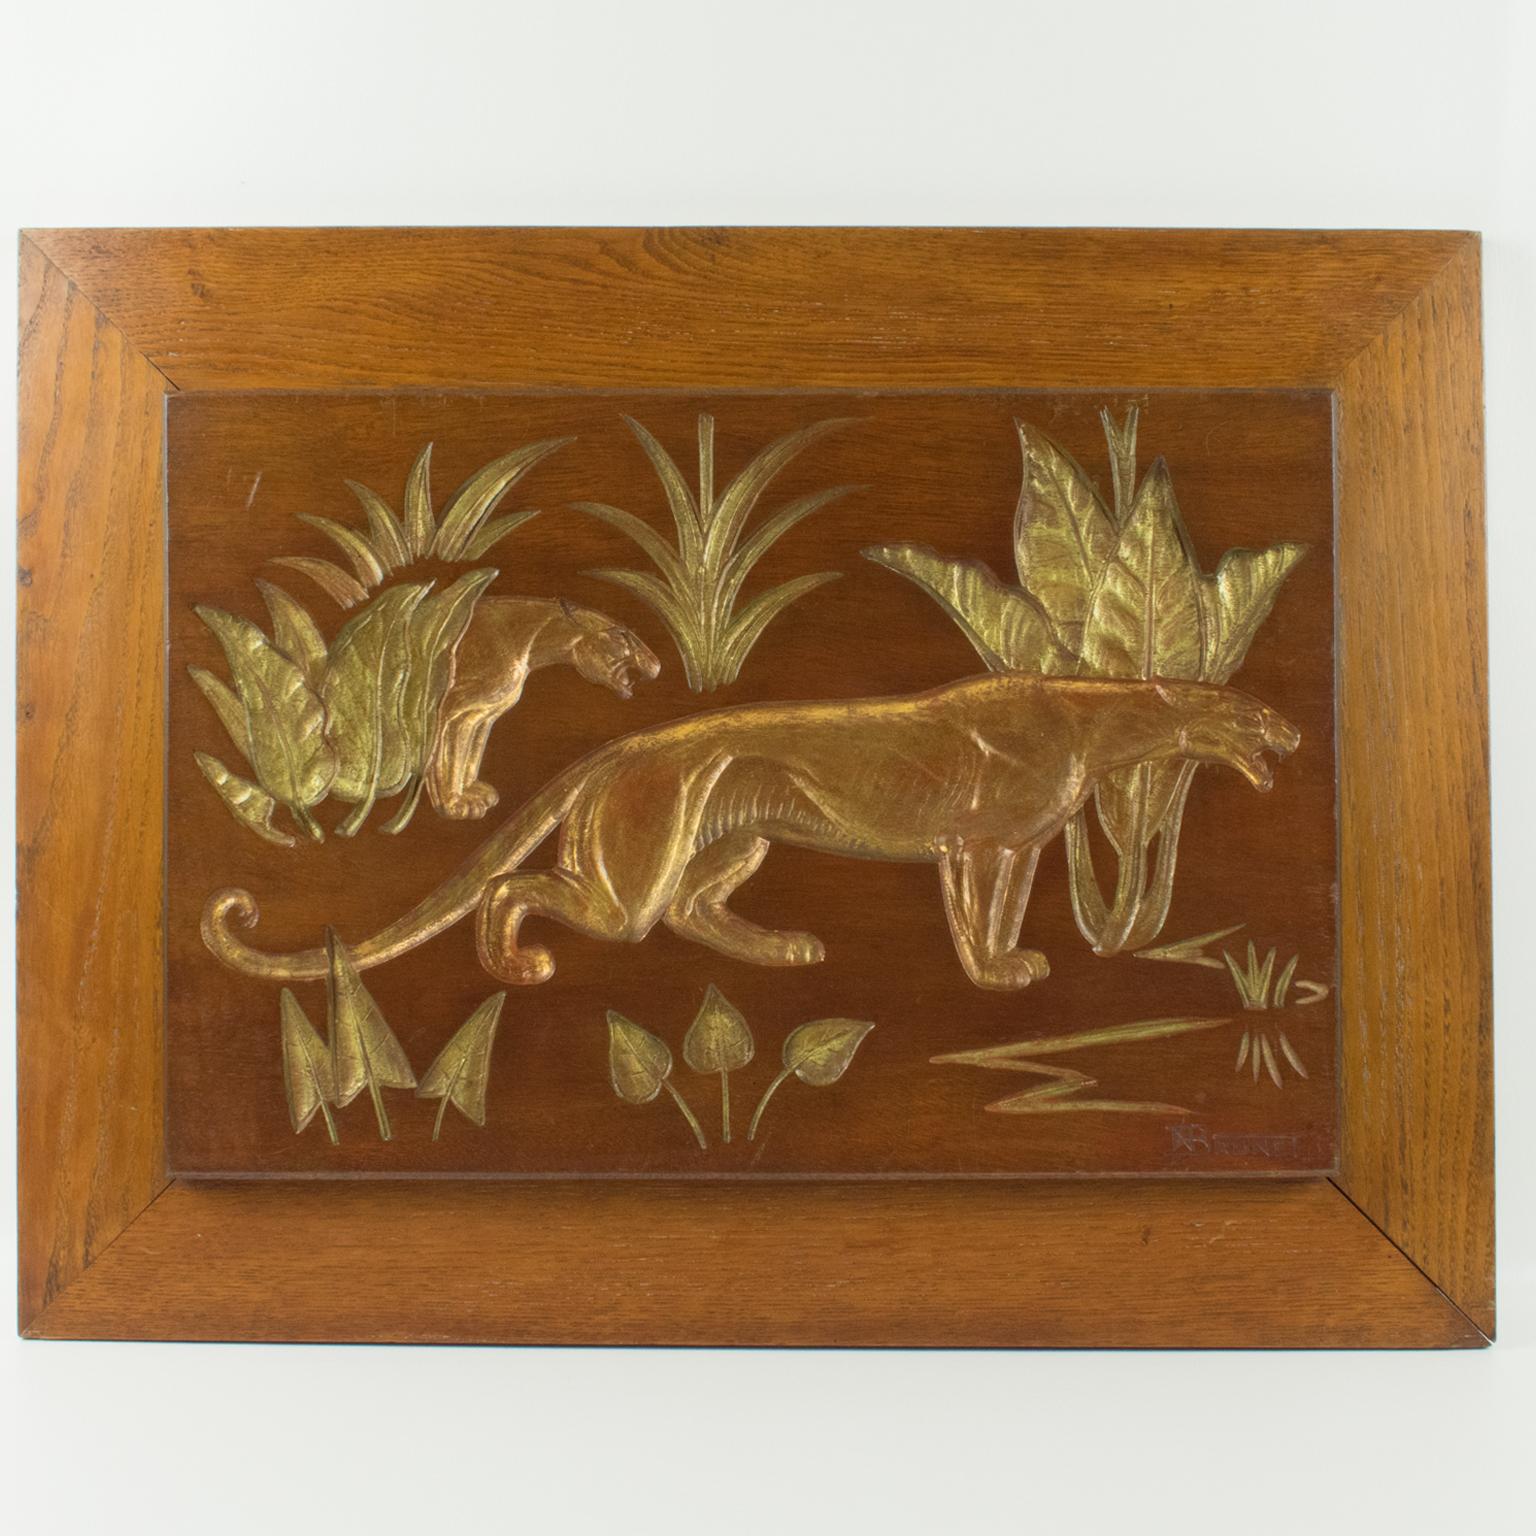 Panthers in the Jungle Art Deco Carved Gilt Wood Panel by N. R. Brunet For Sale 4